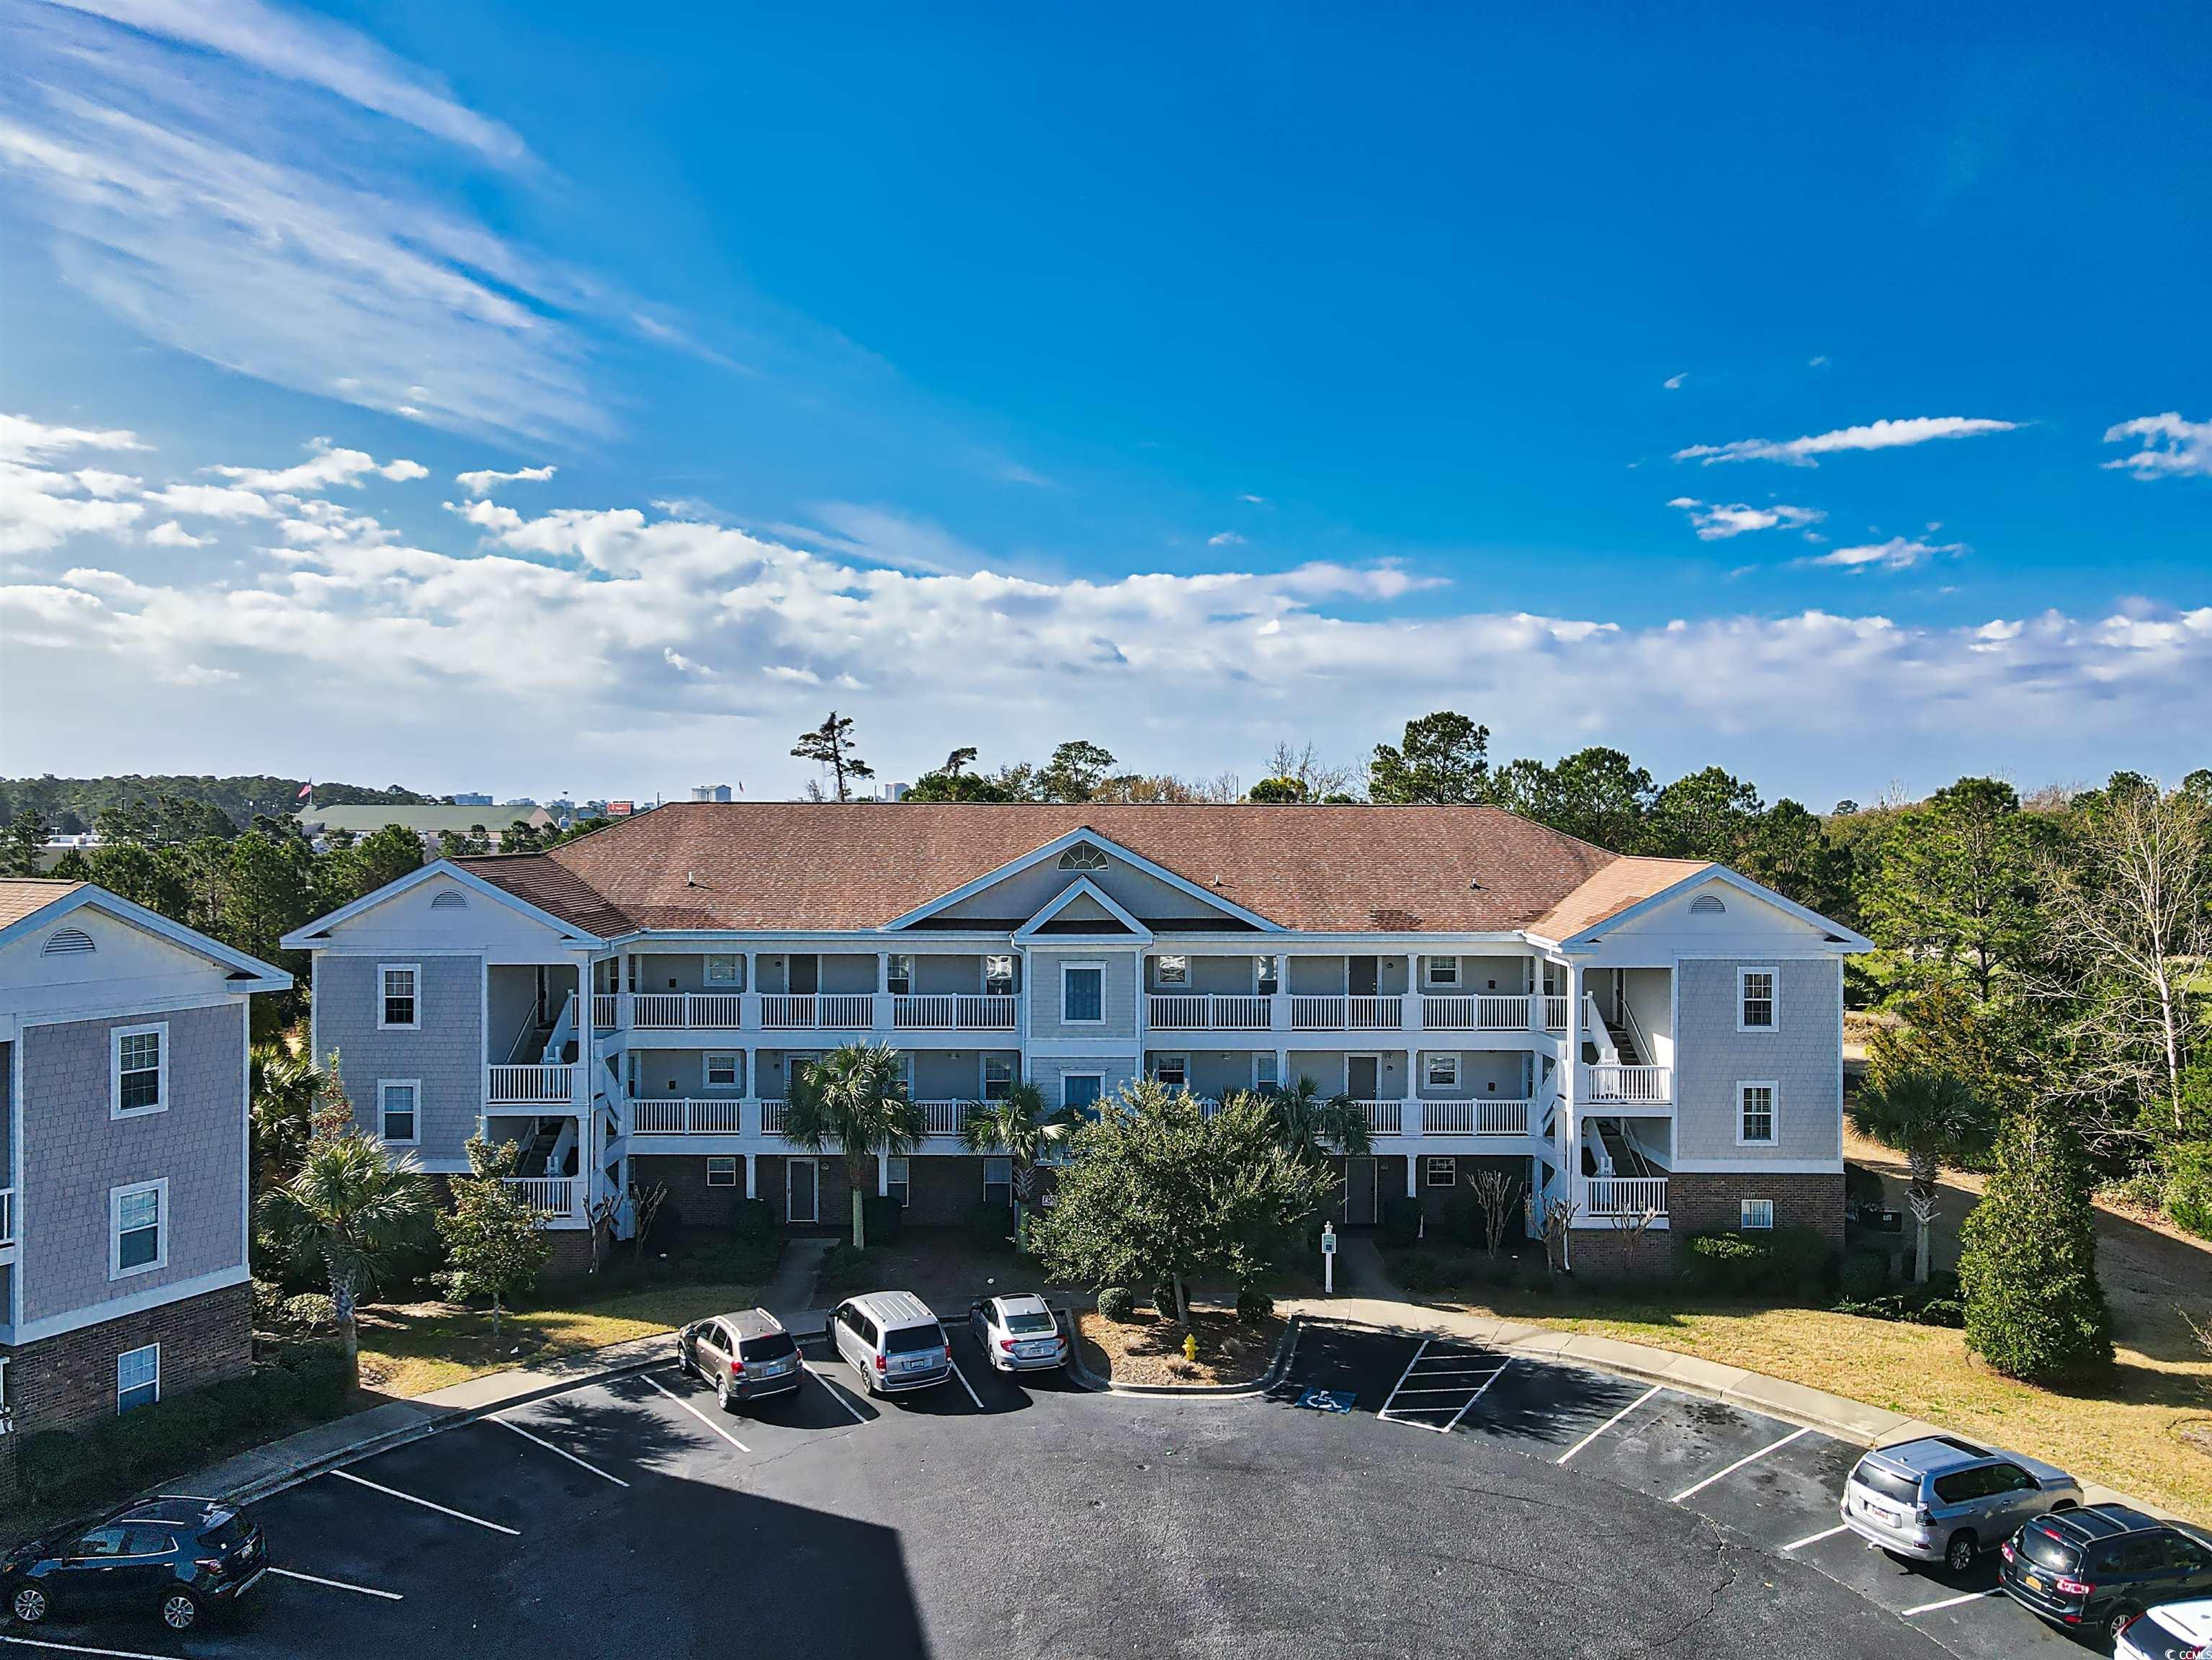 this top floor end unit offers you amazing views and privacy in the prestigious barefoot resort community of ironwood and is located near barefoot landing and some of myrtle beaches finest dining, shopping, golf, and entertainment venues.  you will be surrounded by 4 award winning signature golf courses, a deep-water marina, large saltwater swimming pool, on-site restaurants, private beachfront cabana, outdoor pool, sand volleyball court and tennis courts.  unit also comes furnished with a   transferable golf membership.  you will fall in love with what this condo has to offer.  features and updates include lpv flooring in the dining area, living area, bedrooms and tile in the kitchen and bathrooms.  a sliding glass door will invite you to the patio where you can spend your time enjoying the breathtaking views of the intercoastal waterway.  there is also plenty of room with three bedrooms, two full baths, large living/dining area, spacious kitchen with breakfast bar and a stackable washer and dryer for your convenience.  vaulted ceilings showcase how spacious this unit is and plenty of windows provide you an abundance of sunlight and terrific views throughout.   if you are looking for the perfect sanctuary to escape, this is the one for you.